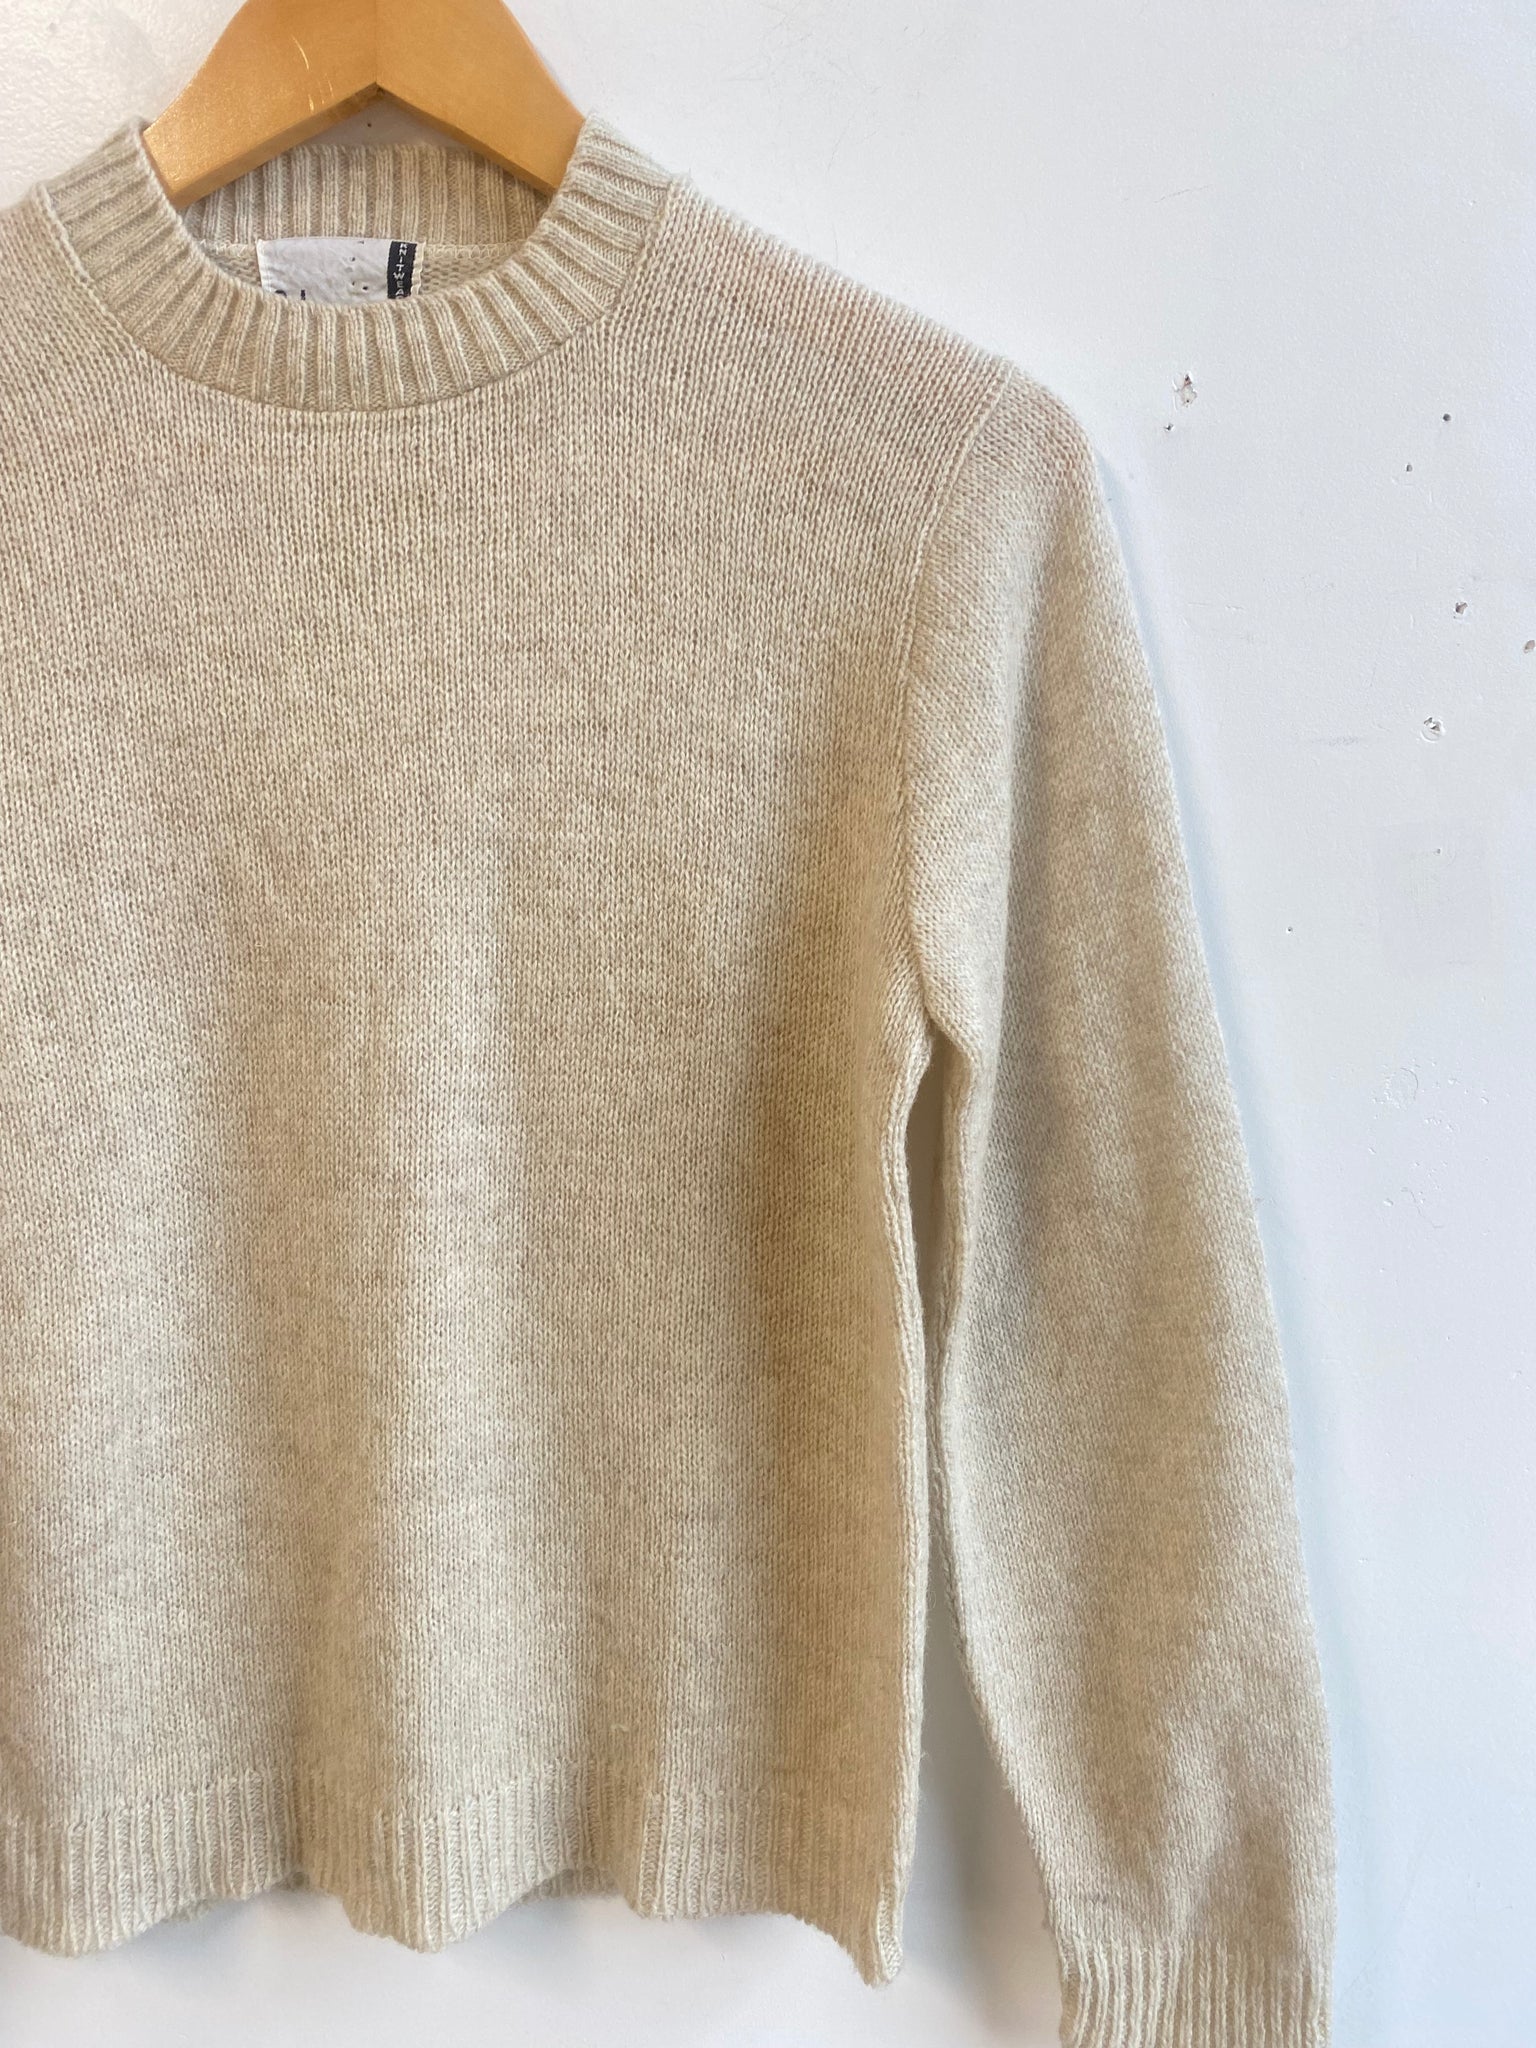 70s Ivory Knit Wool Pullover